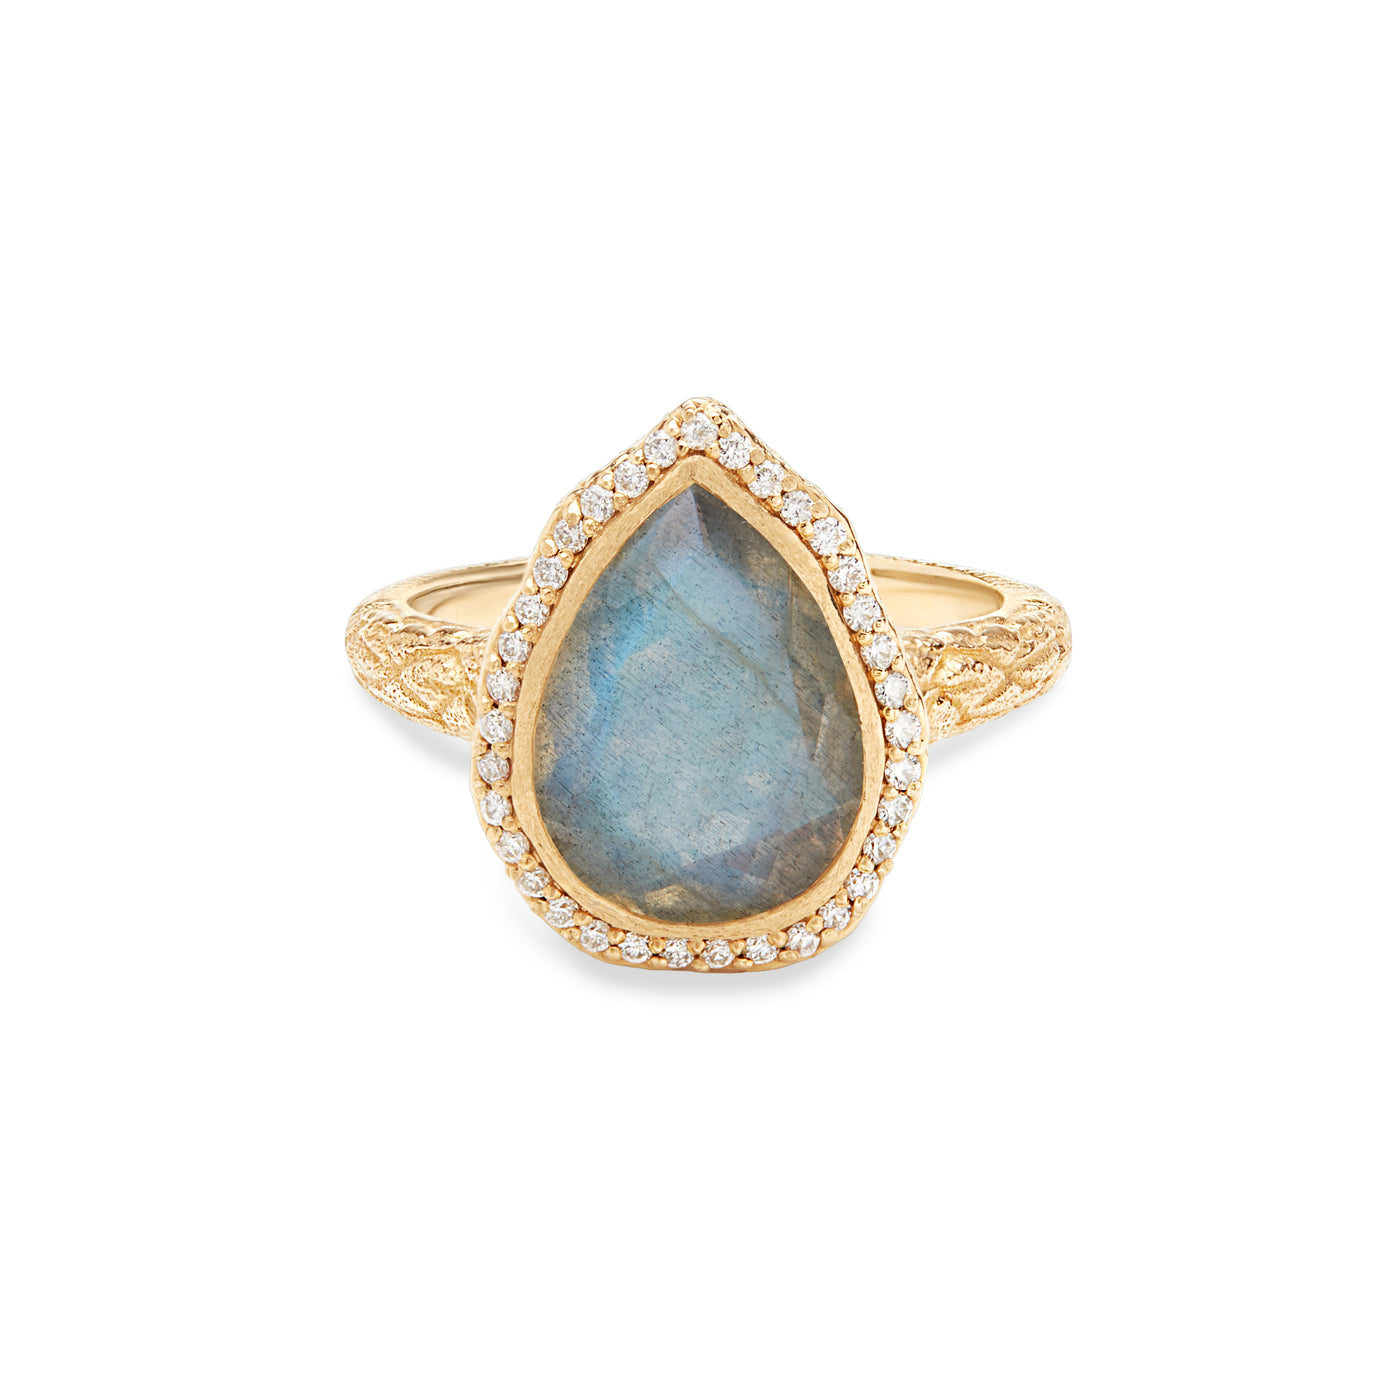 14 Karat Yellow Gold Ring with Pear Shaped Labradorite Stone with Halo of White Diamonds Against White Background